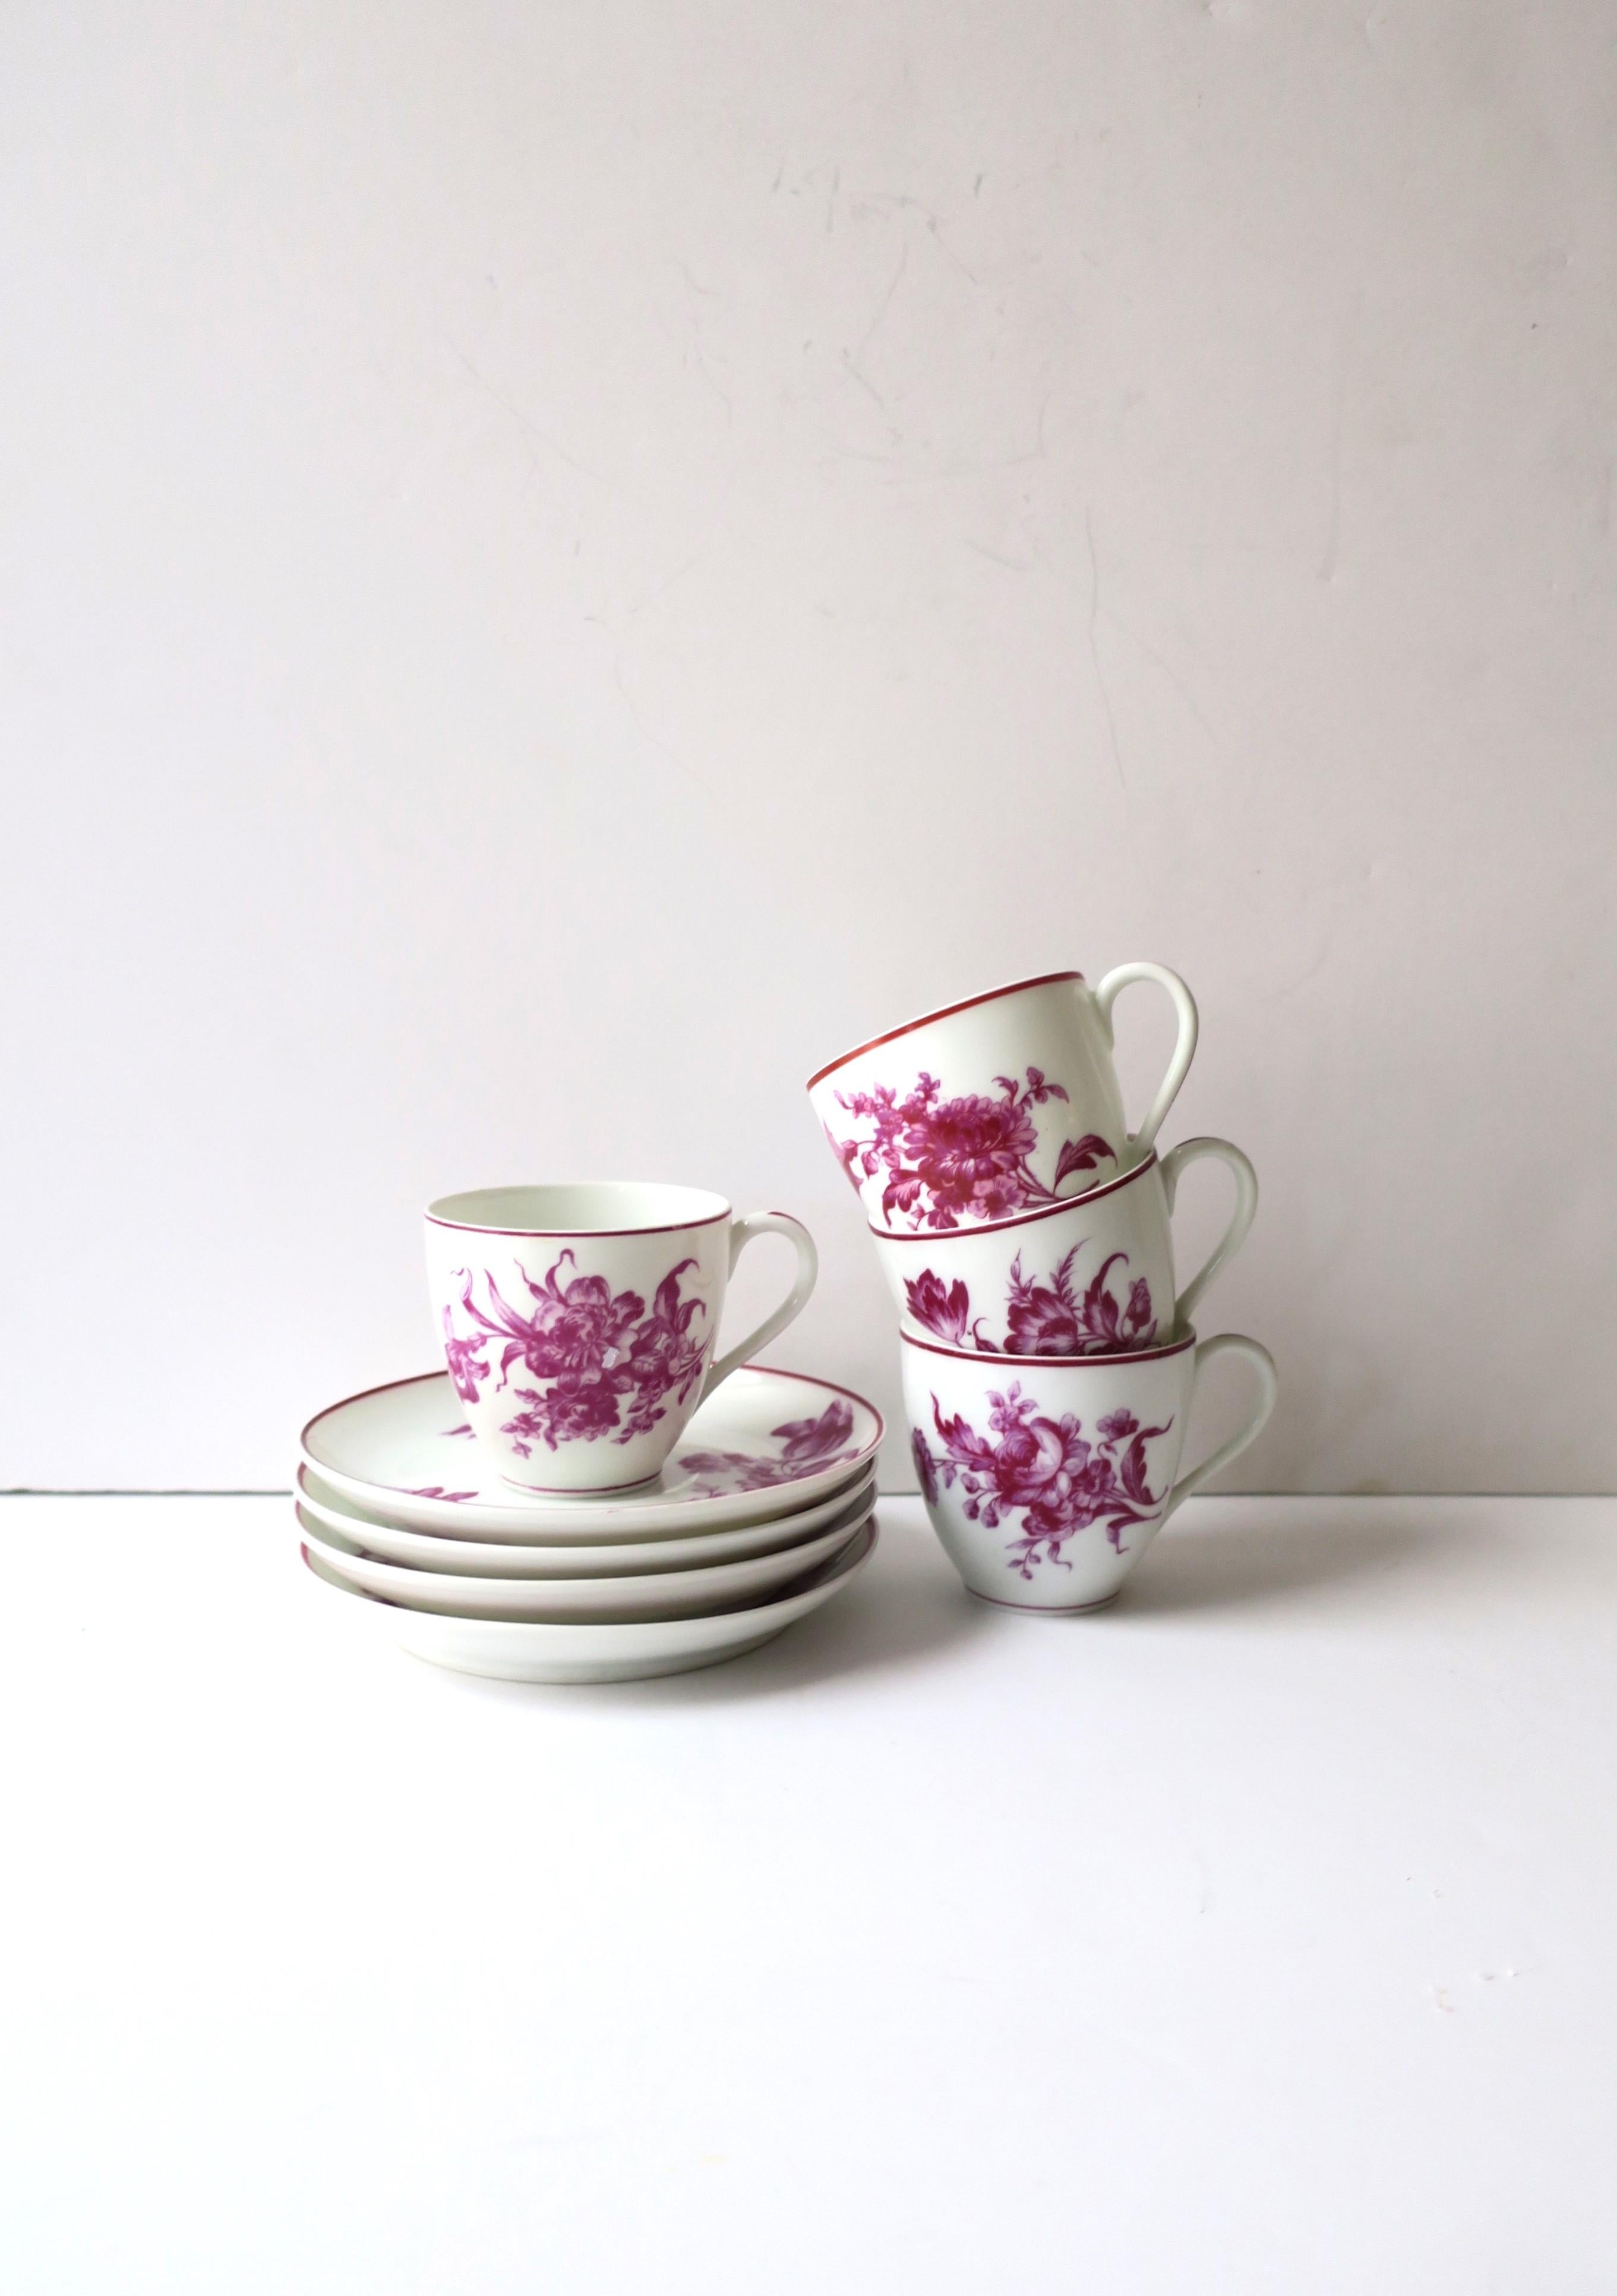 A very beautiful and rare set of four (4) French porcelain coffee espresso or tea demitasse cup and saucer set in white porcelain and magenta pink, by Toy-Le Rosey, Paris, France, circa early-20th century. Each set has a different magenta pink